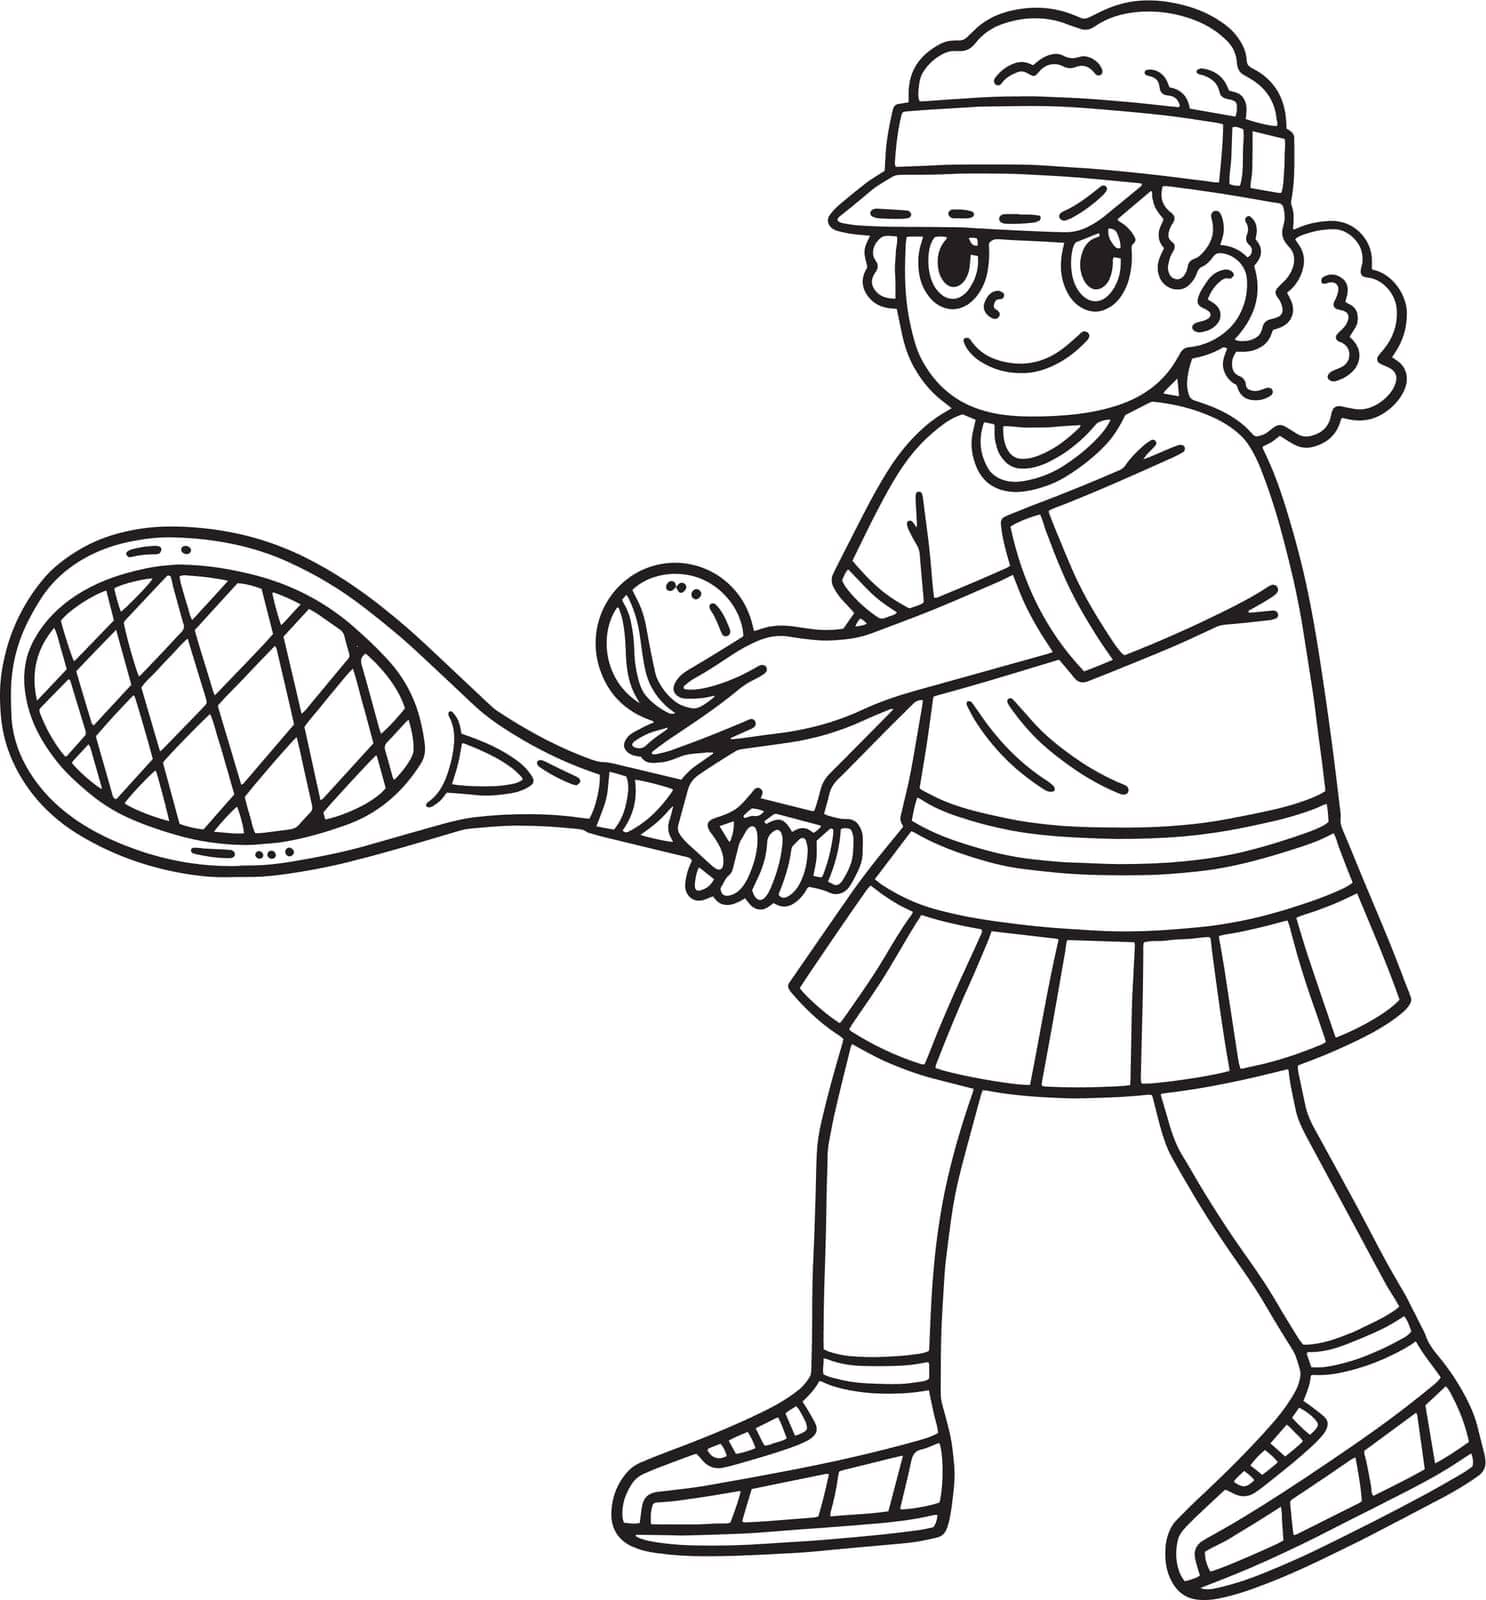 Tennis Female Player Ready to Serve Isolated by abbydesign